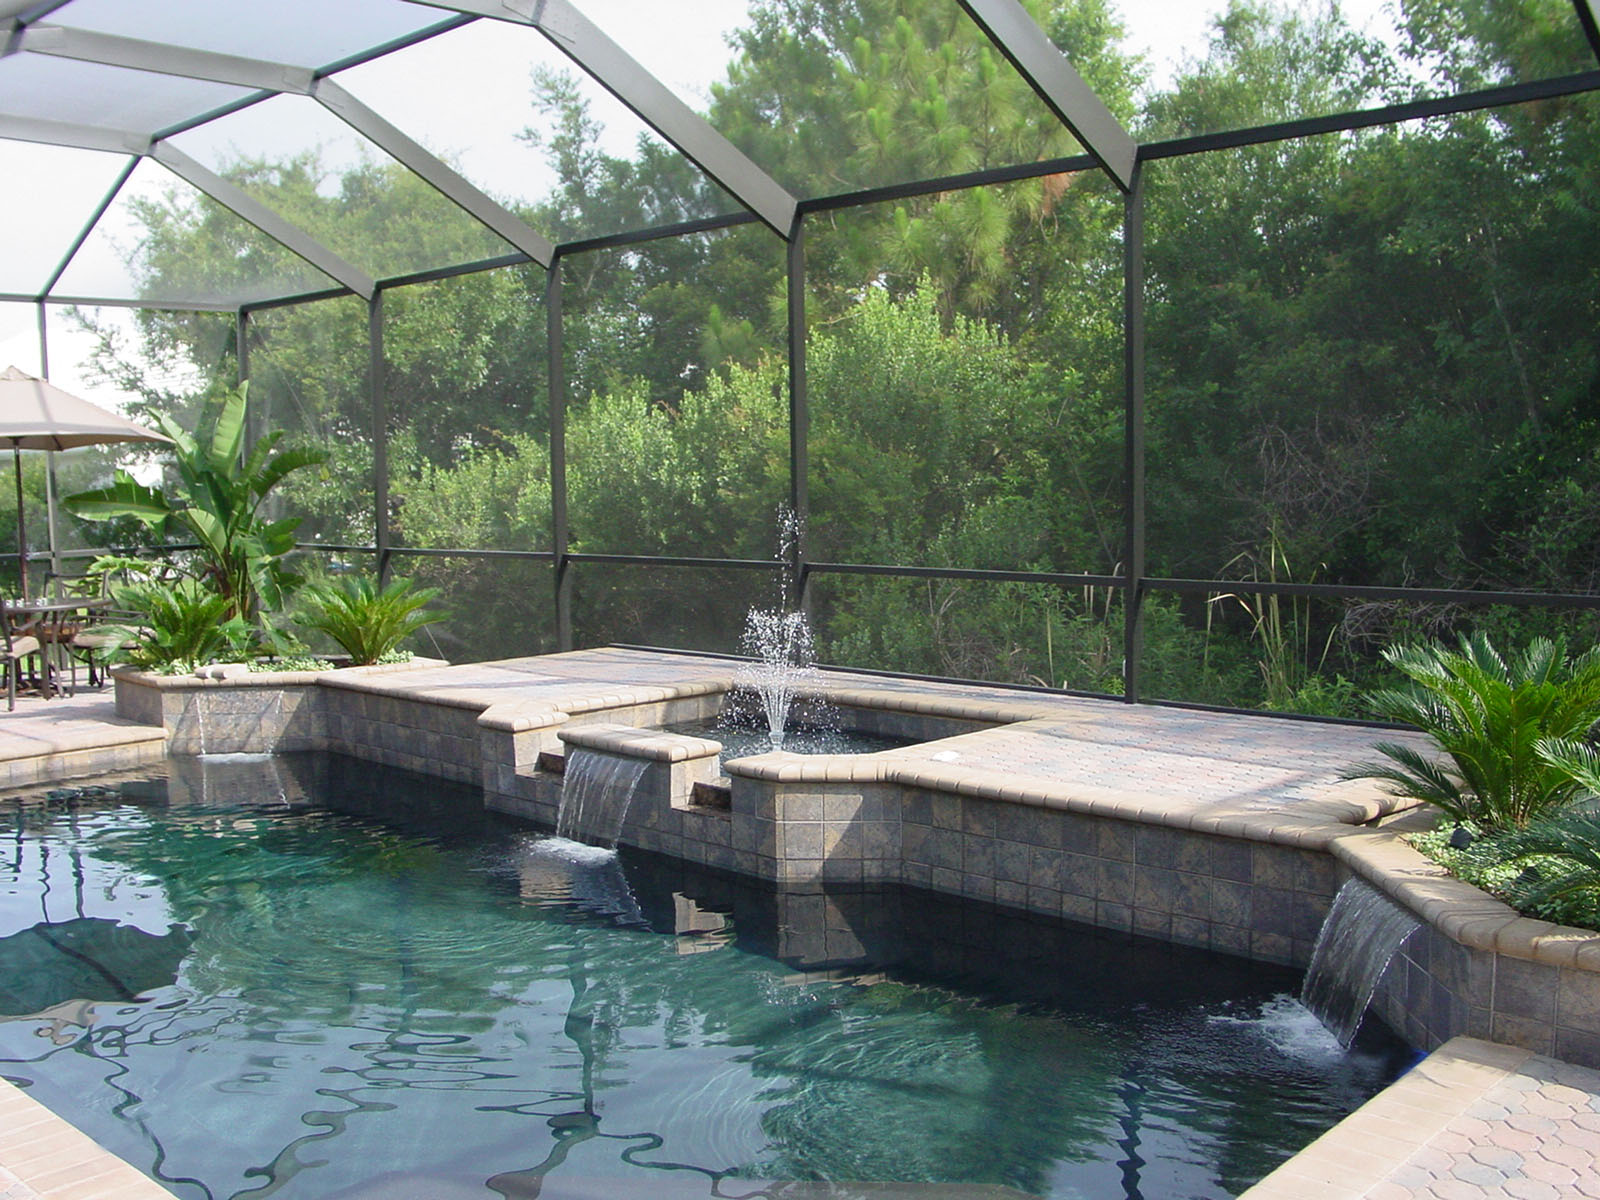 New swimming pool and spa installations for the bay area.  Custom swimming pool installations